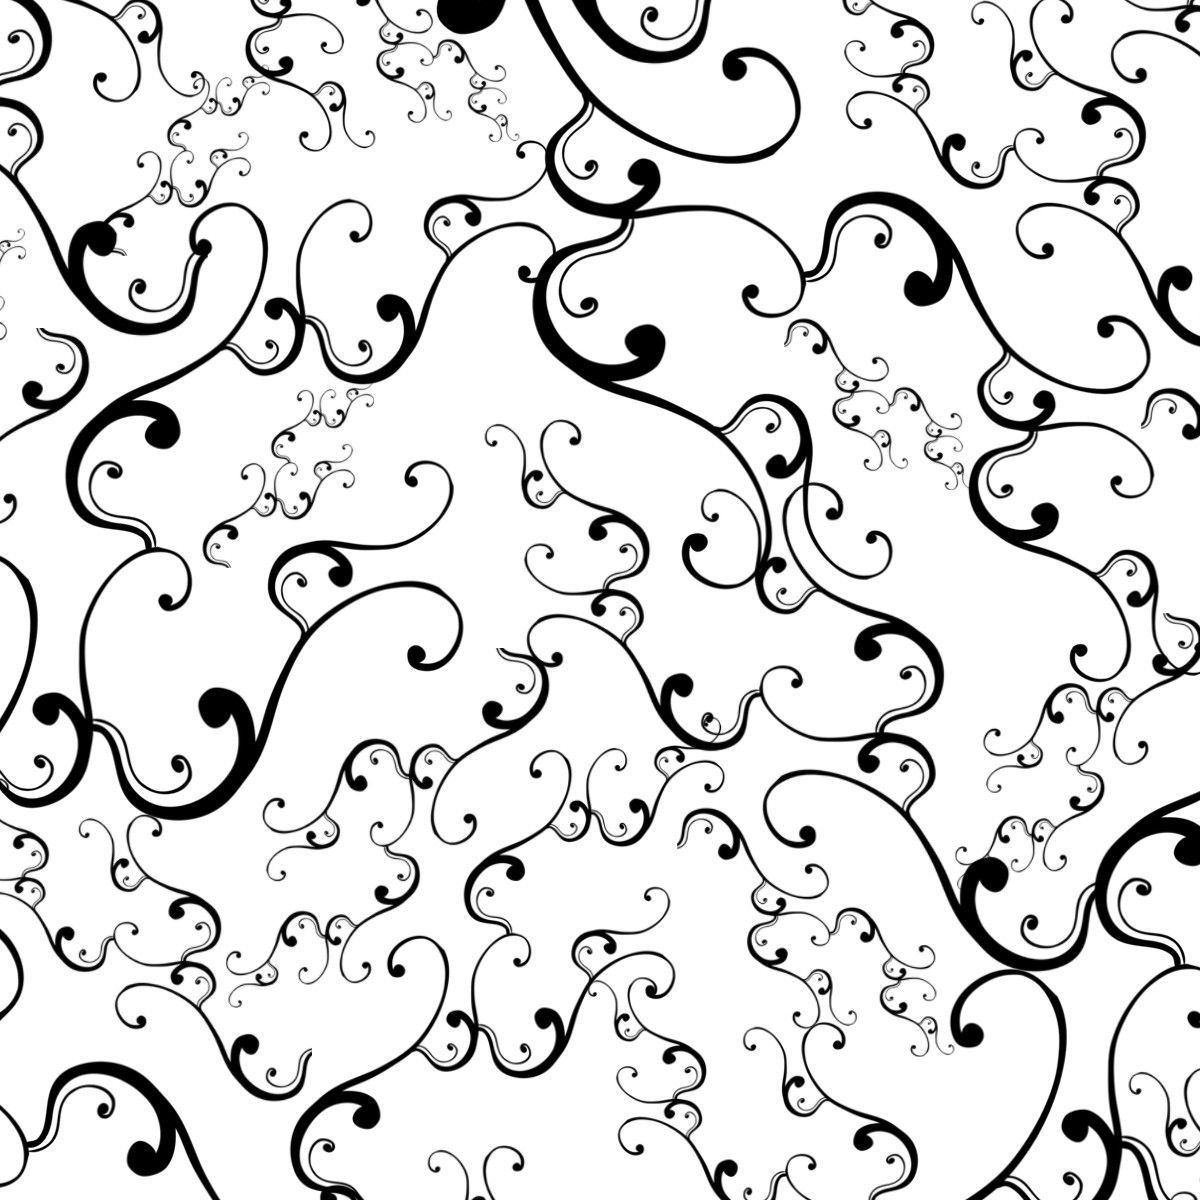 Swirly Backgrounds - Wallpaper Cave